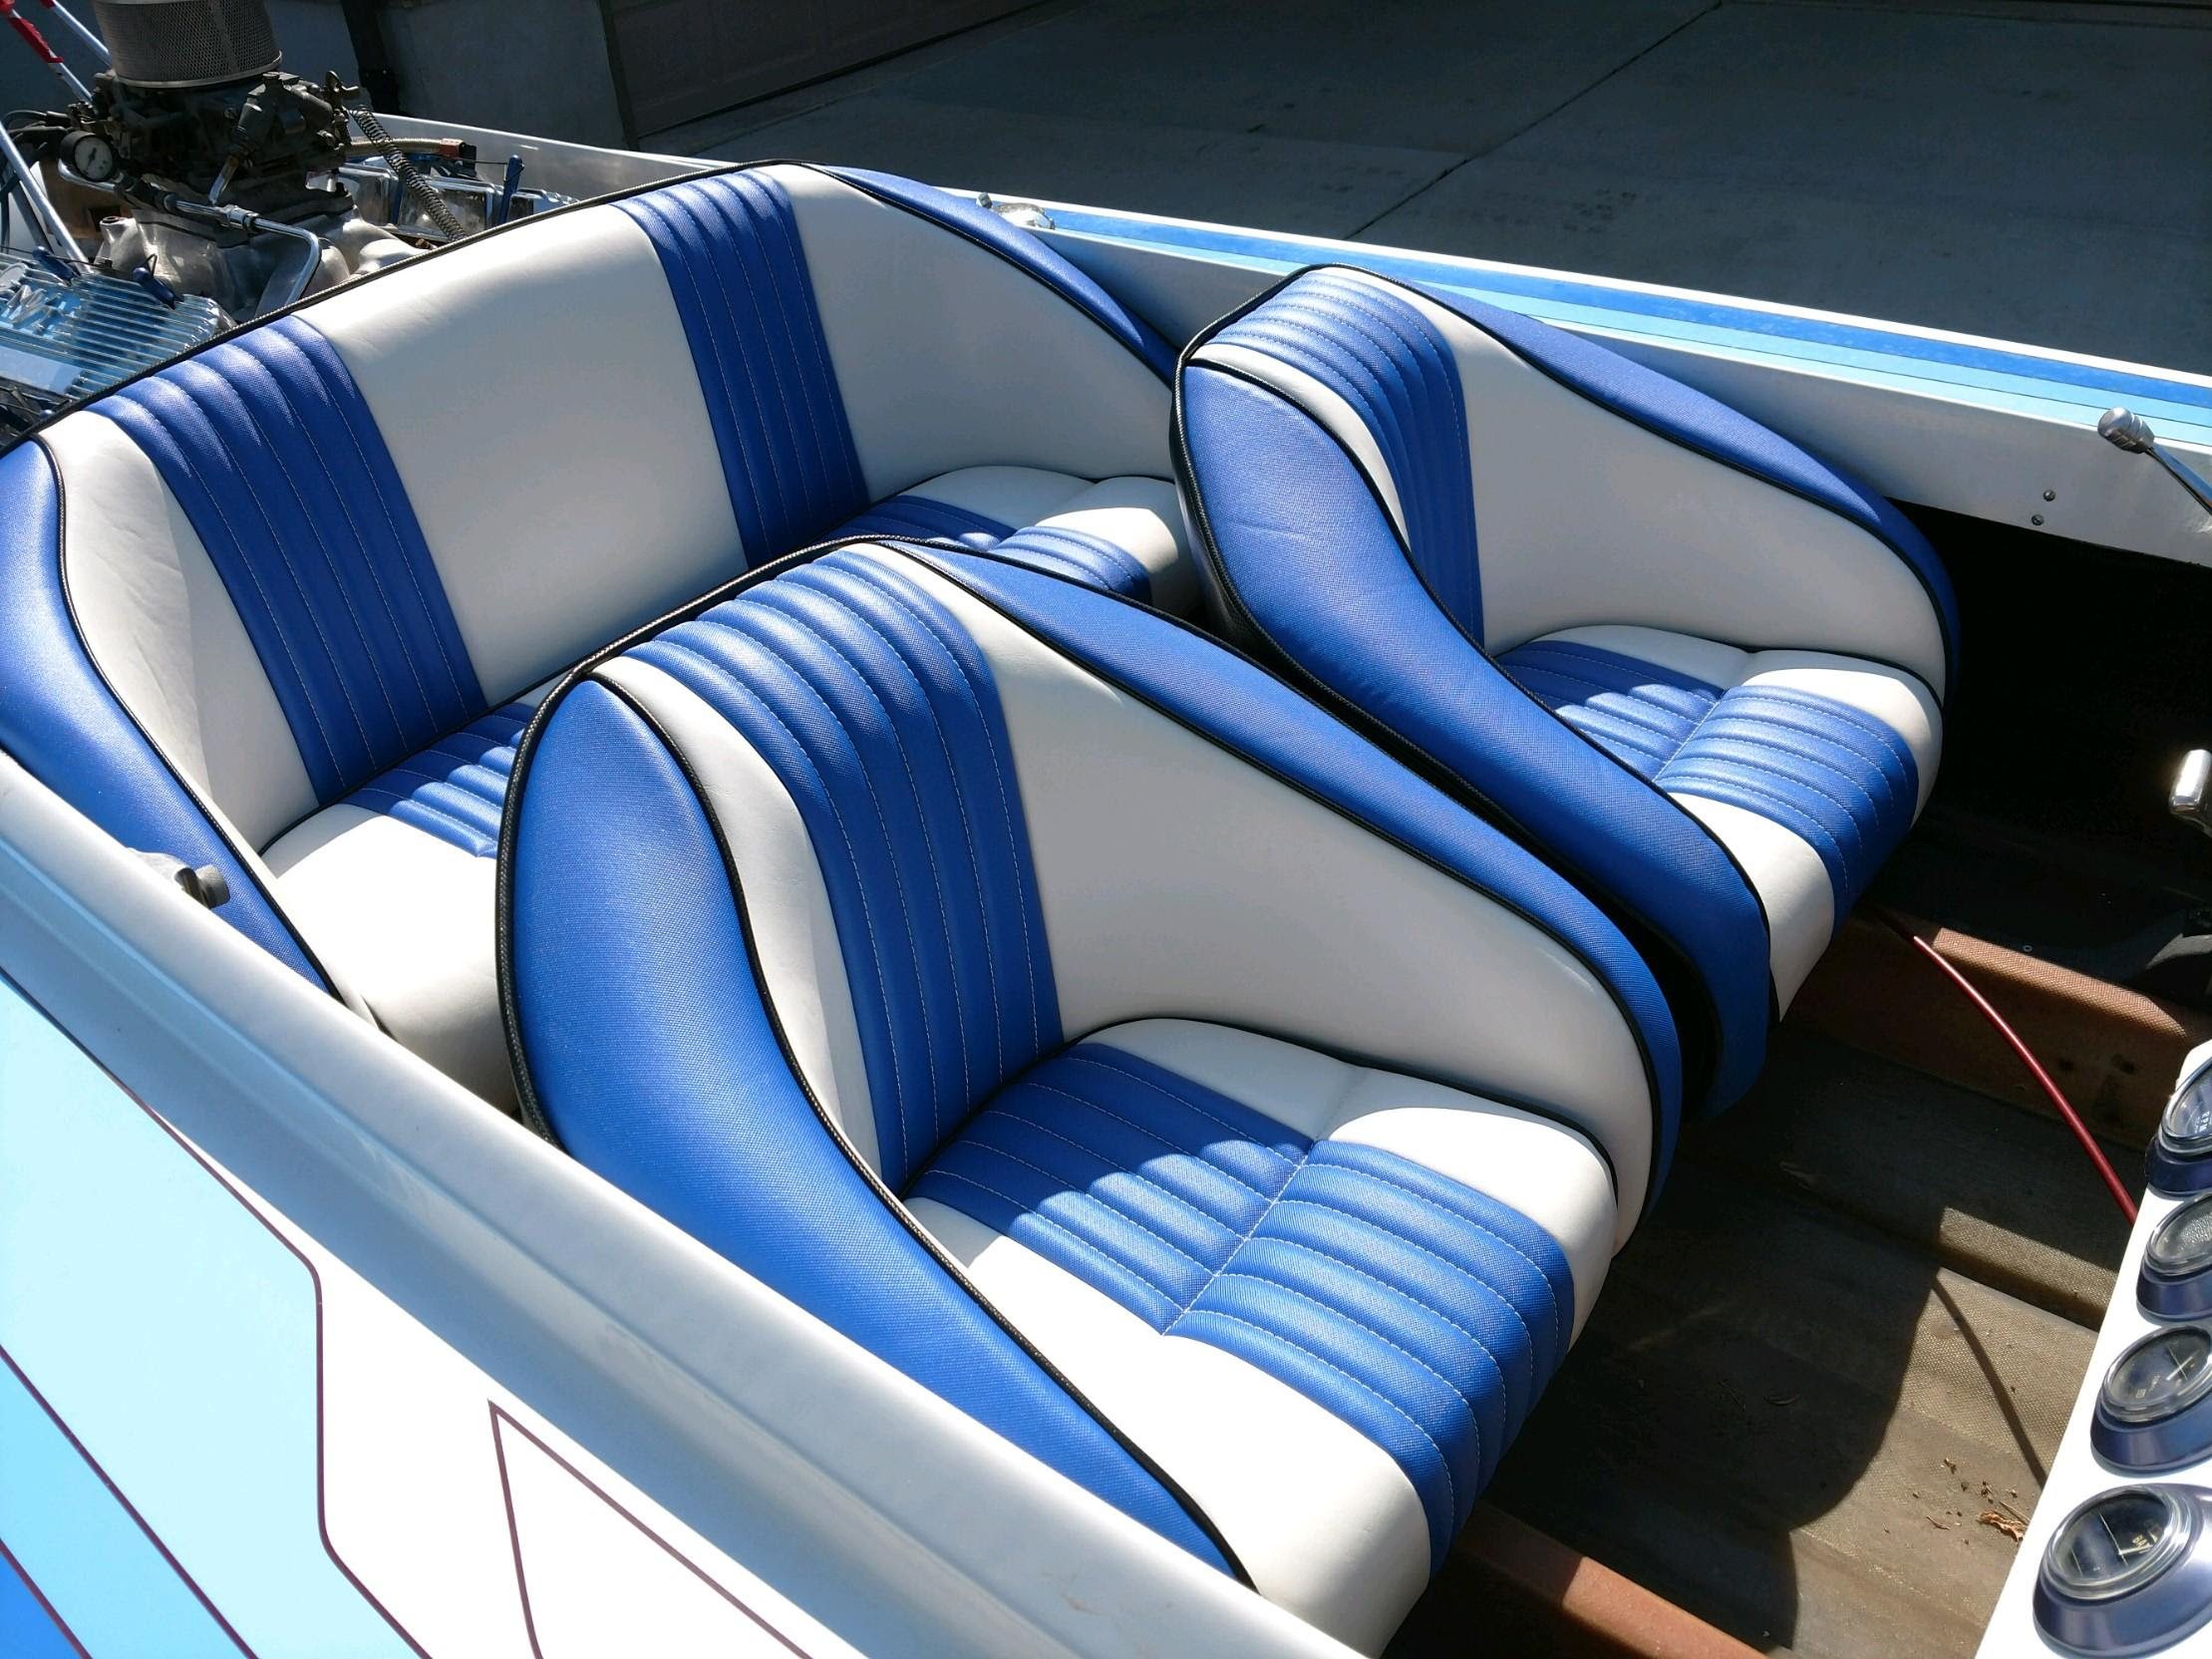 Boat Seat Upholstery Shops Near Me - Upholstery